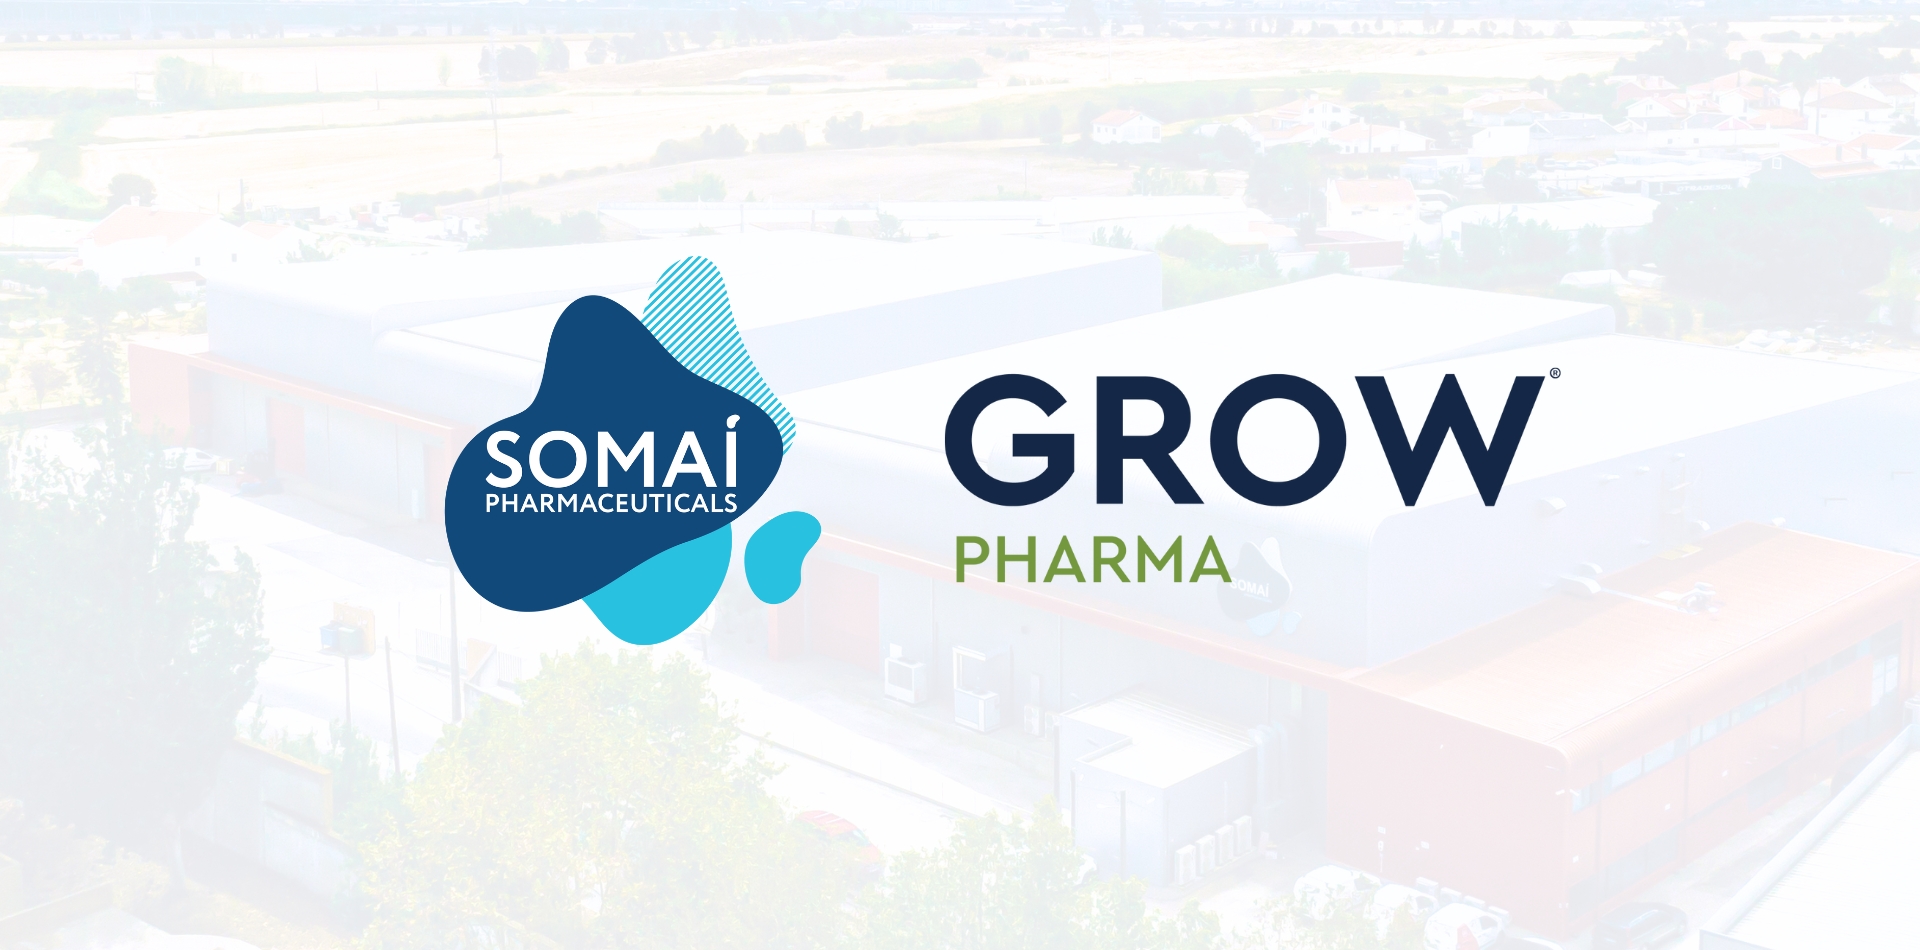 SOMAÍ Pharmaceuticals Introduces UK to The Most Complete Cannabis-Based Product Portfolio Following a Distribution Deal